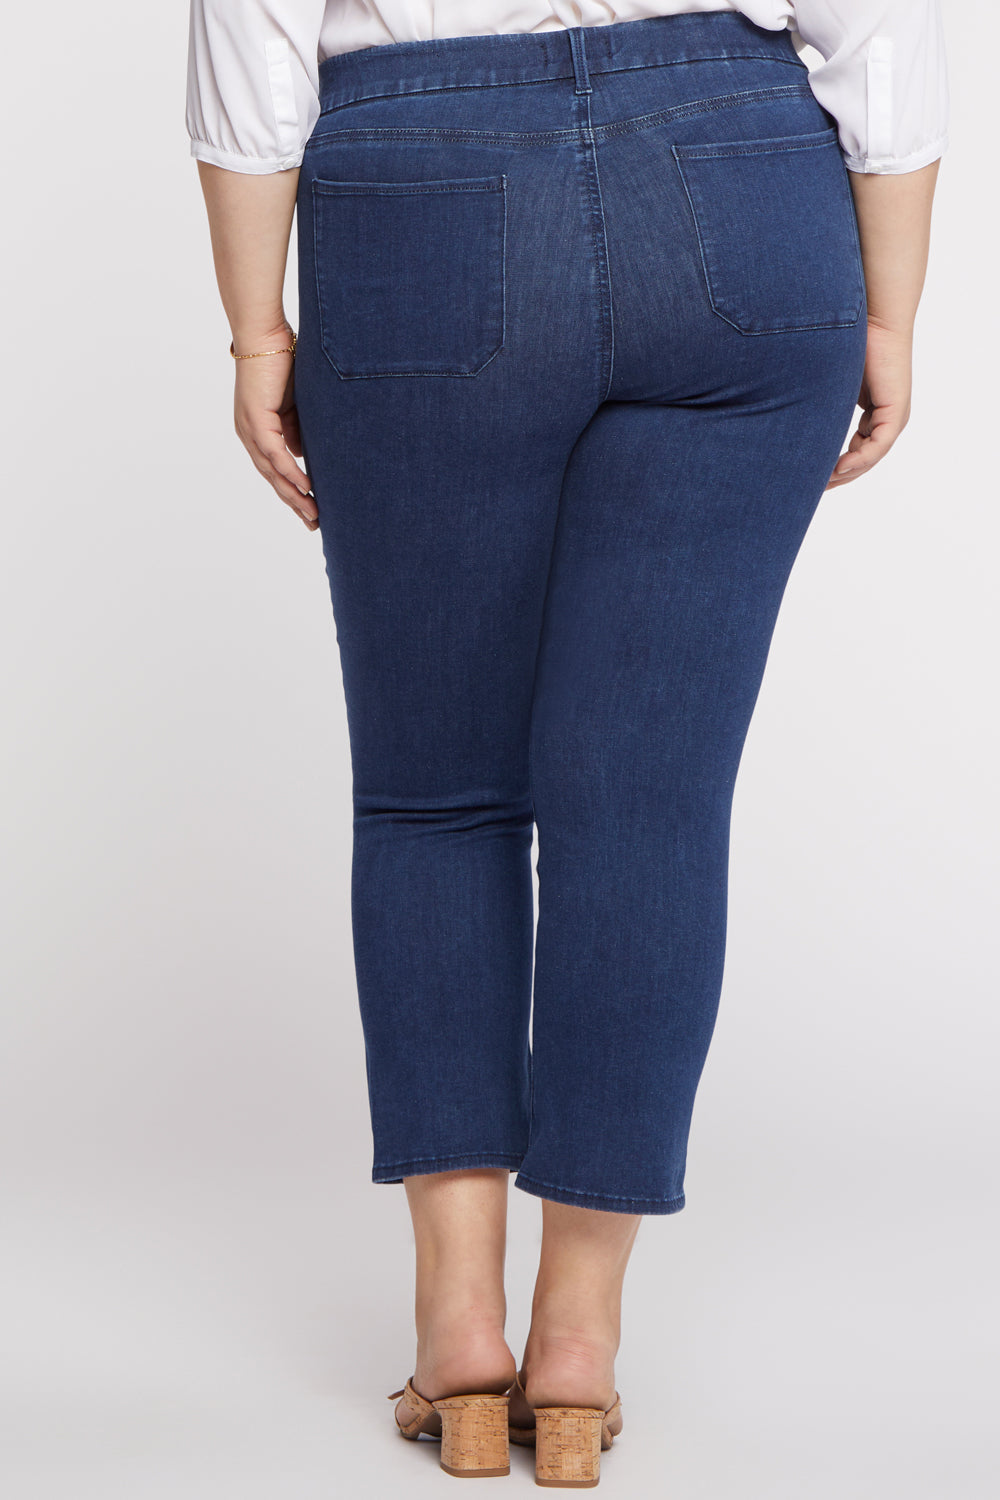 NYDJ Waist-Match™ Marilyn Straight Ankle Jeans In Plus Size With Patch Pockets And Button Fly - Genesis